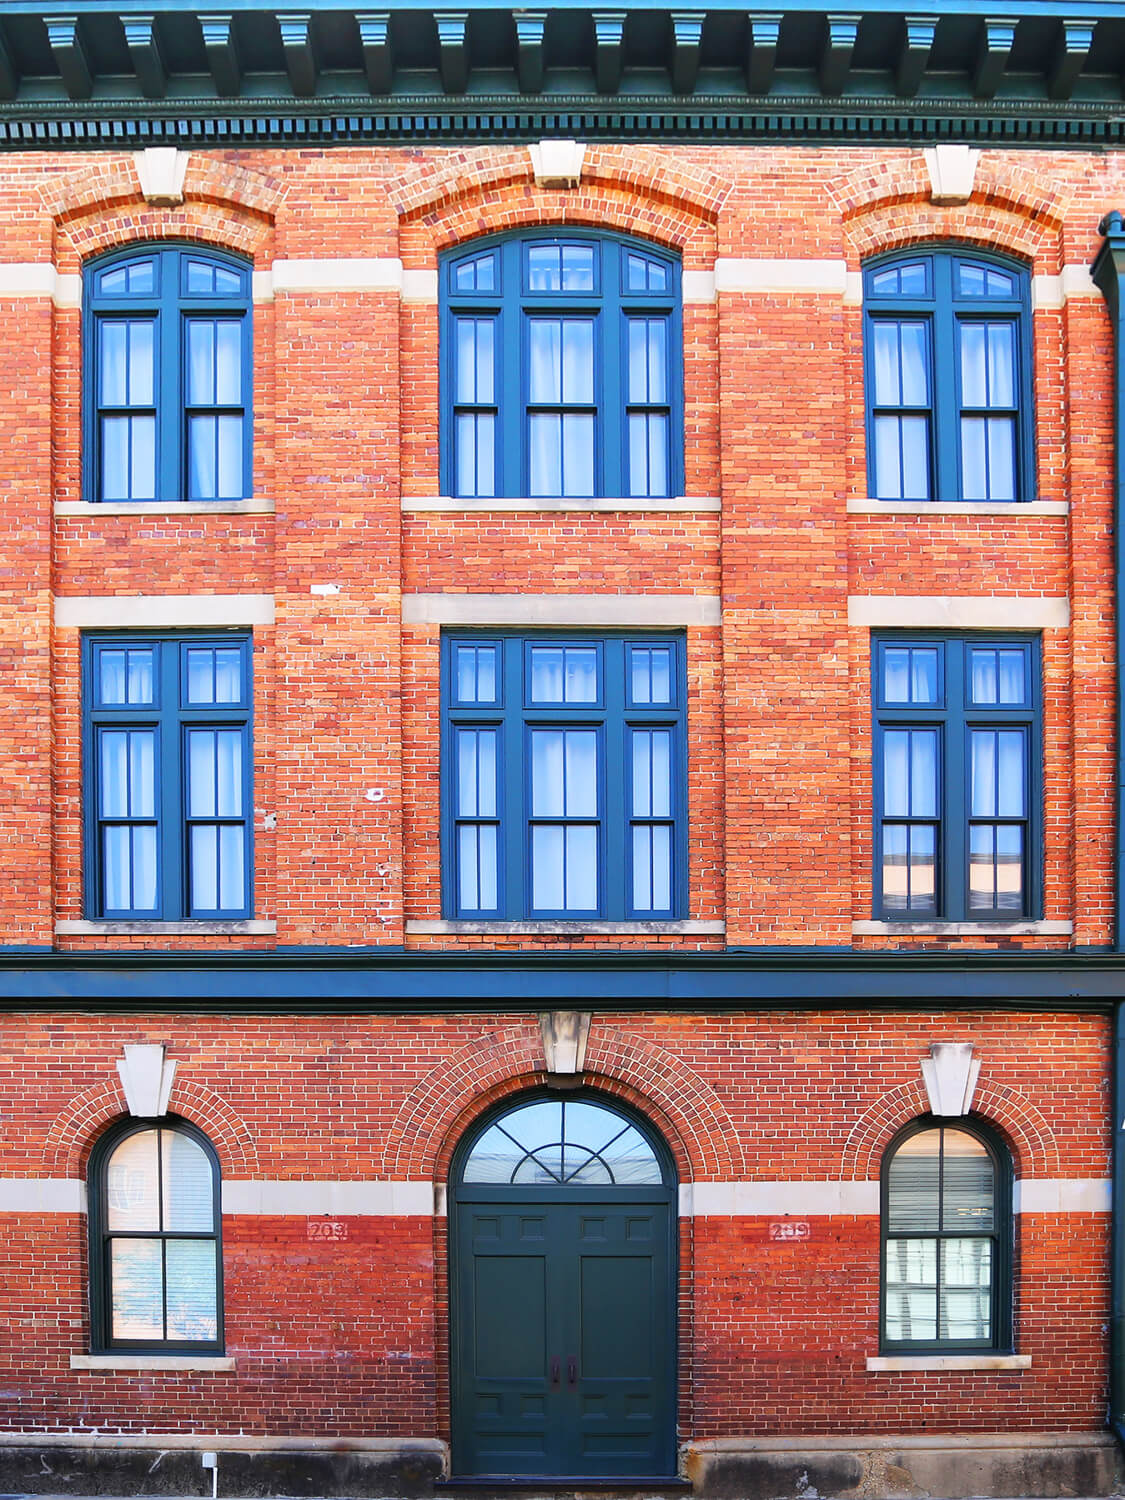 Printing Press Lofts Designed by Foshee Architecture – New Exterior Windows